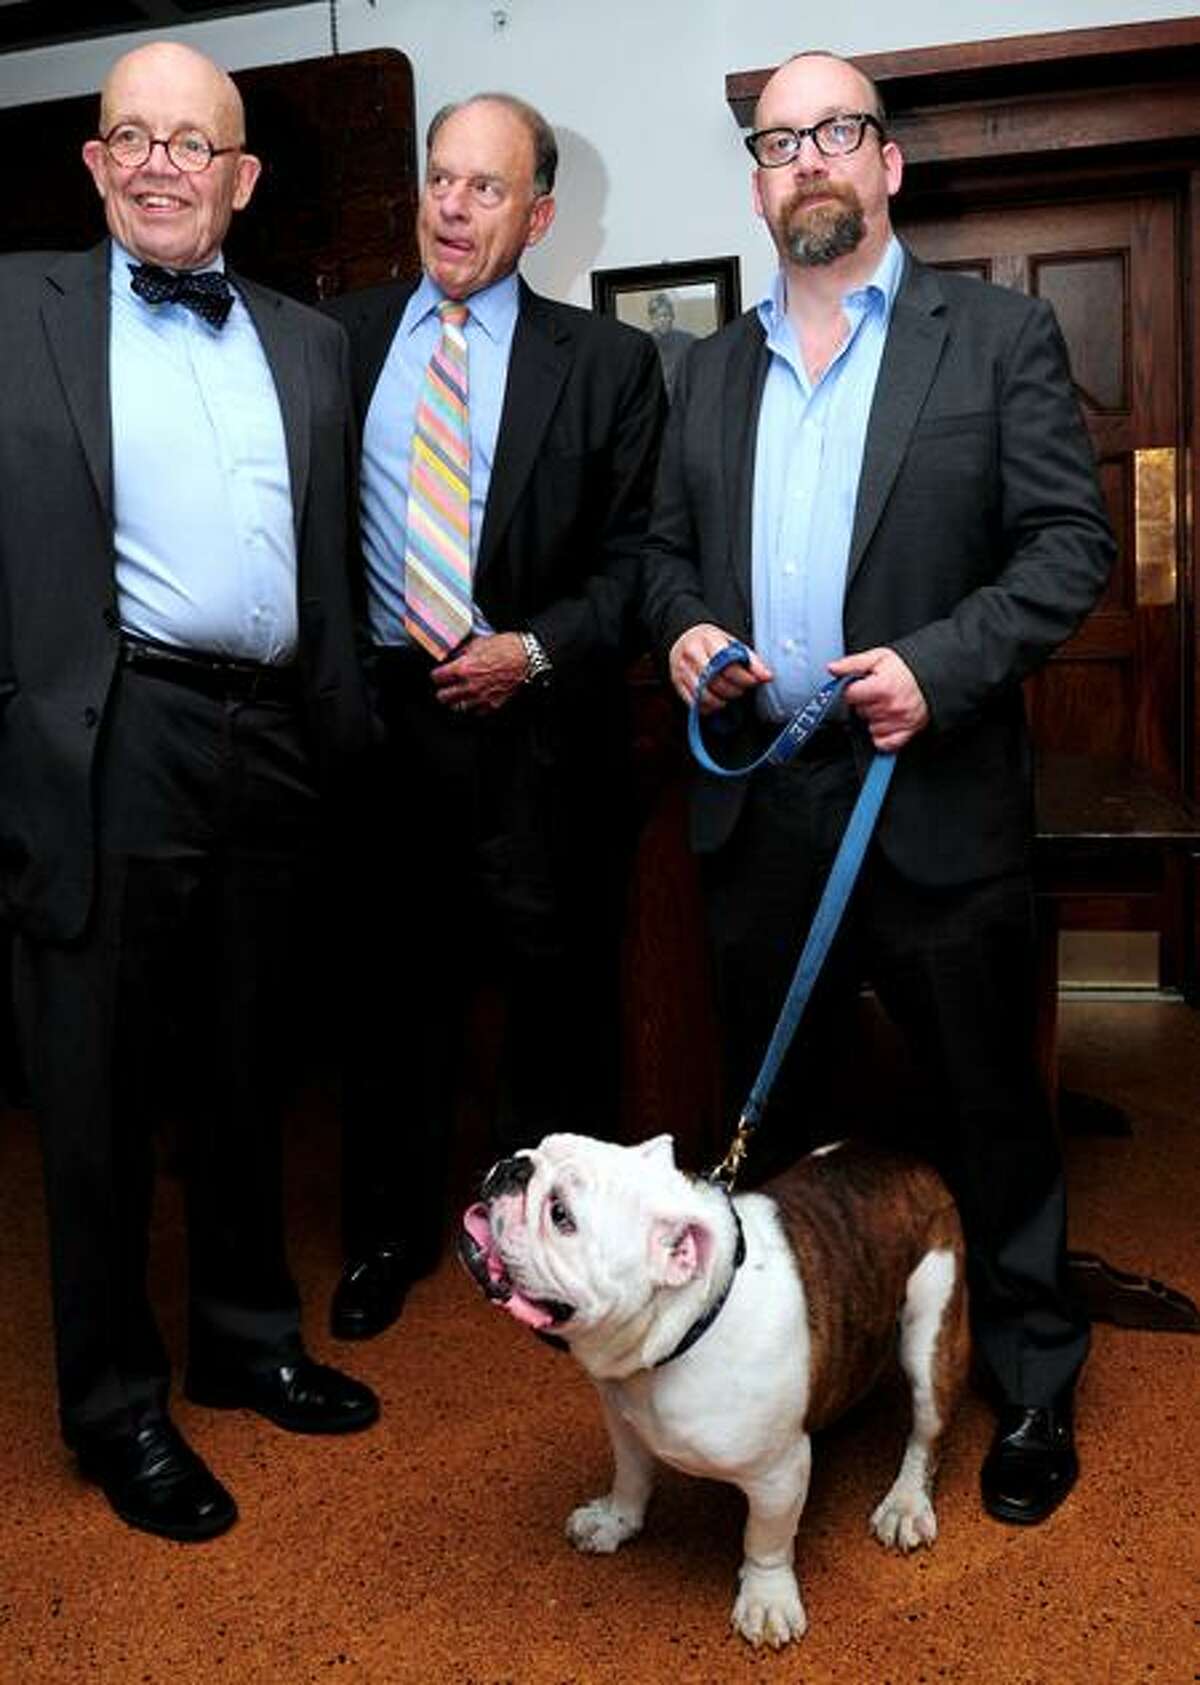 Left to right, Douglas Rae, Chairman of the Board of Governors of Mory's, Robert Blanchard, Mory's Council member, and actor Paul Giamatti are photographed Tuesday at Mory's in New Haven with the Yale mascot, Handsome Dan. Arnold Gold/Register